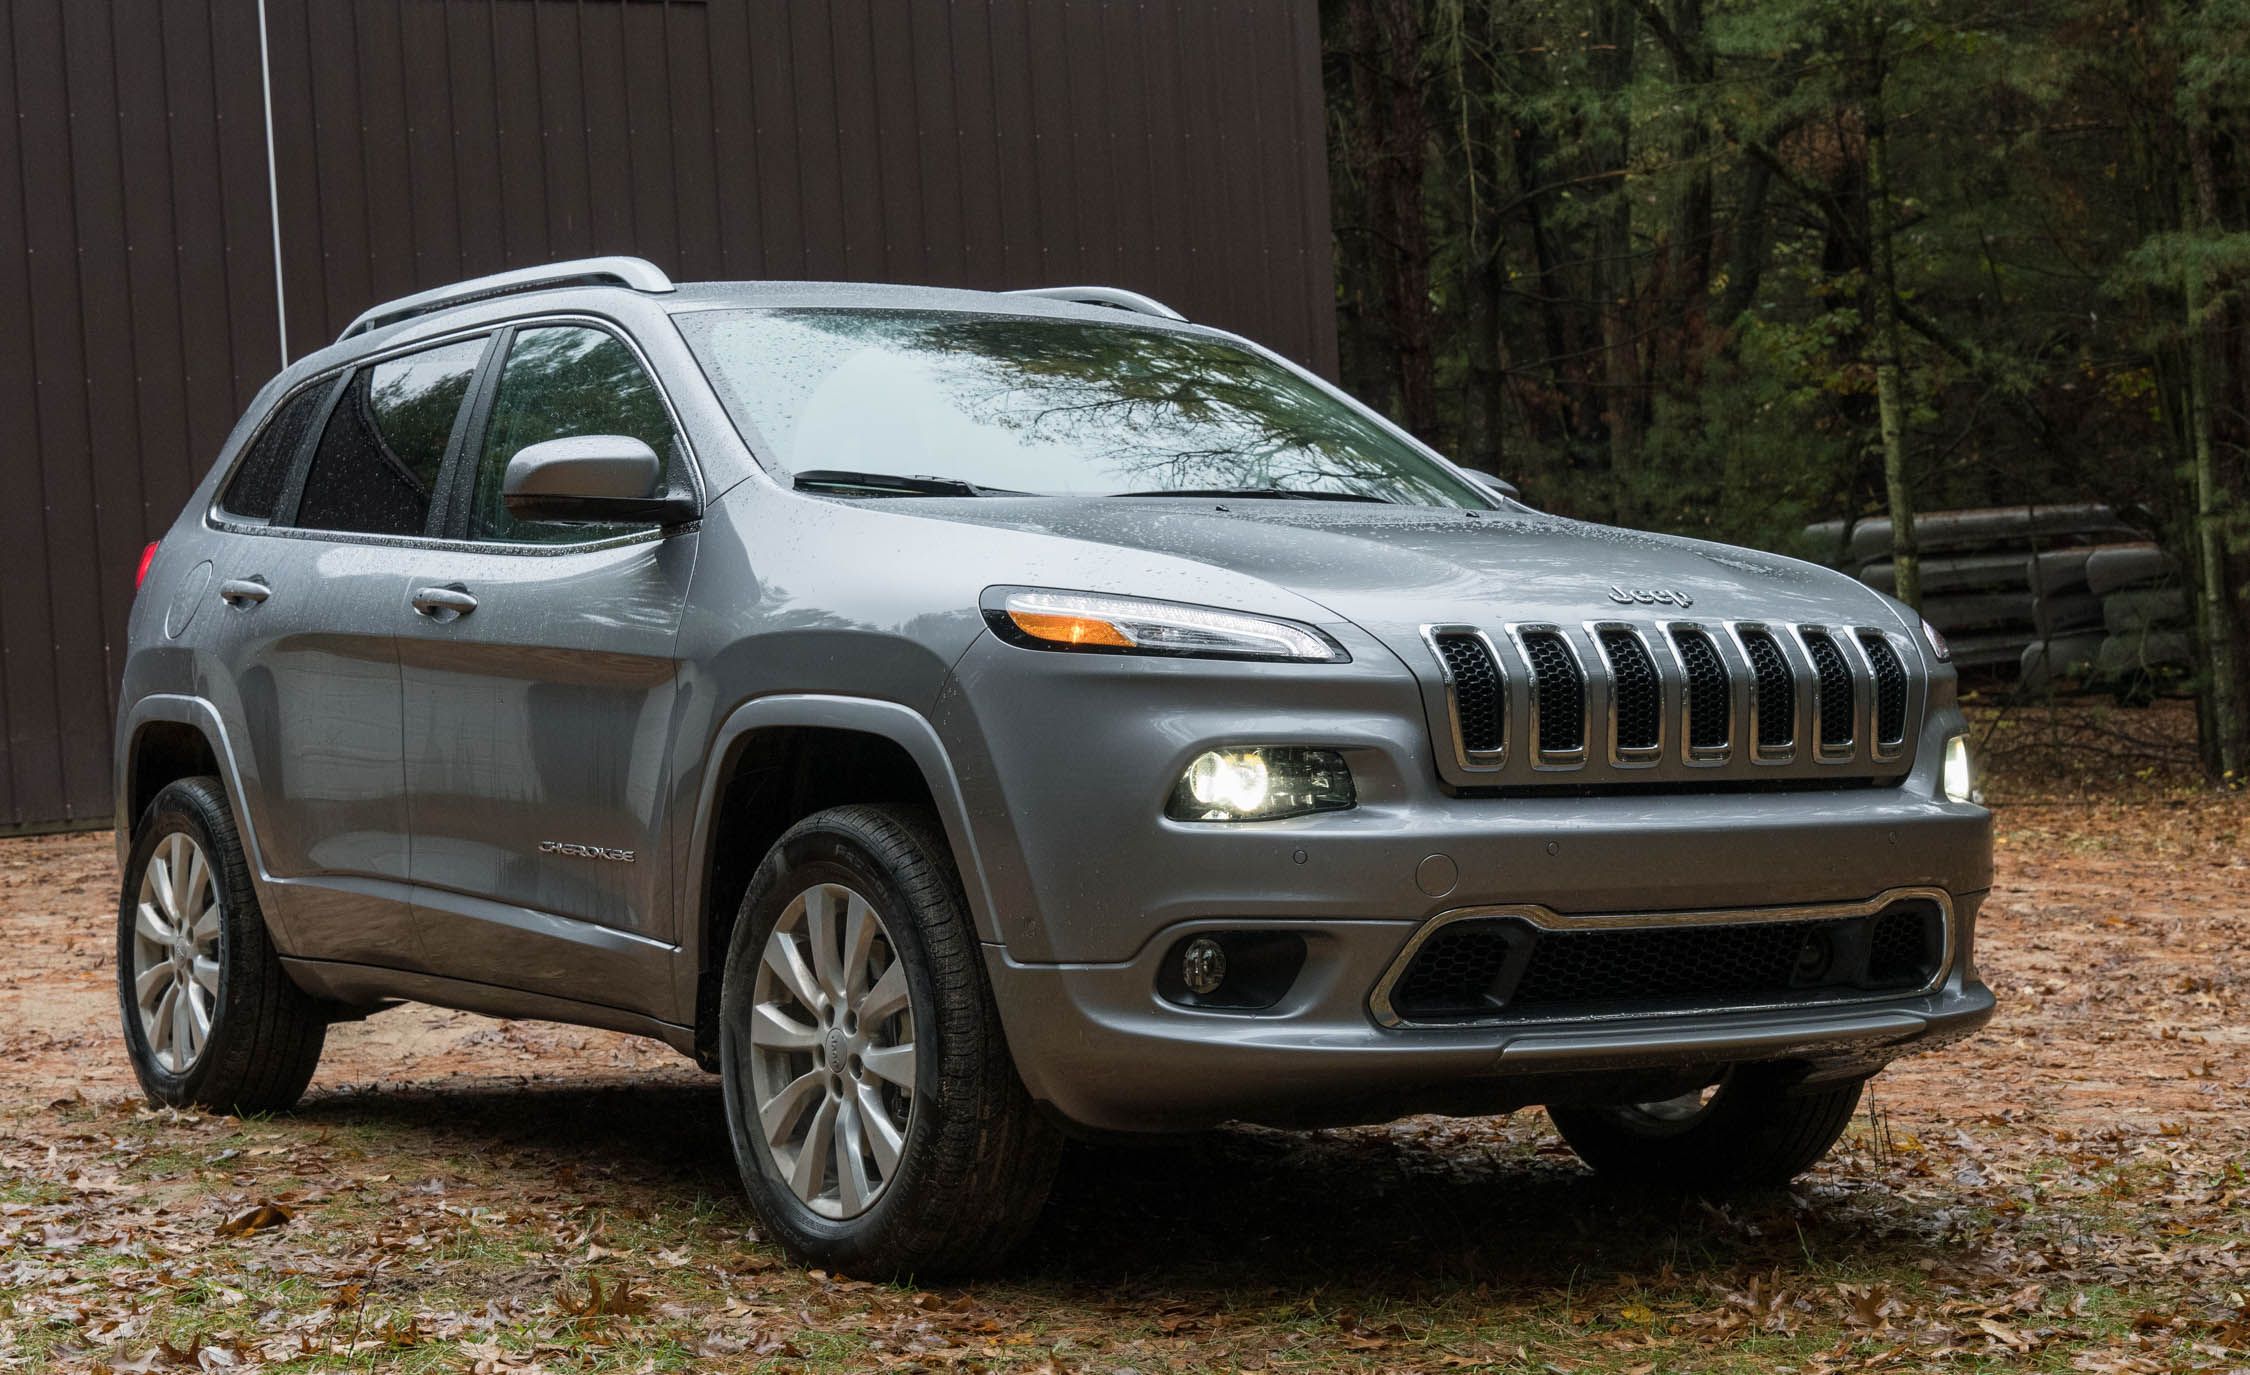 2017 Jeep Cherokee Review, Pricing, and Specs